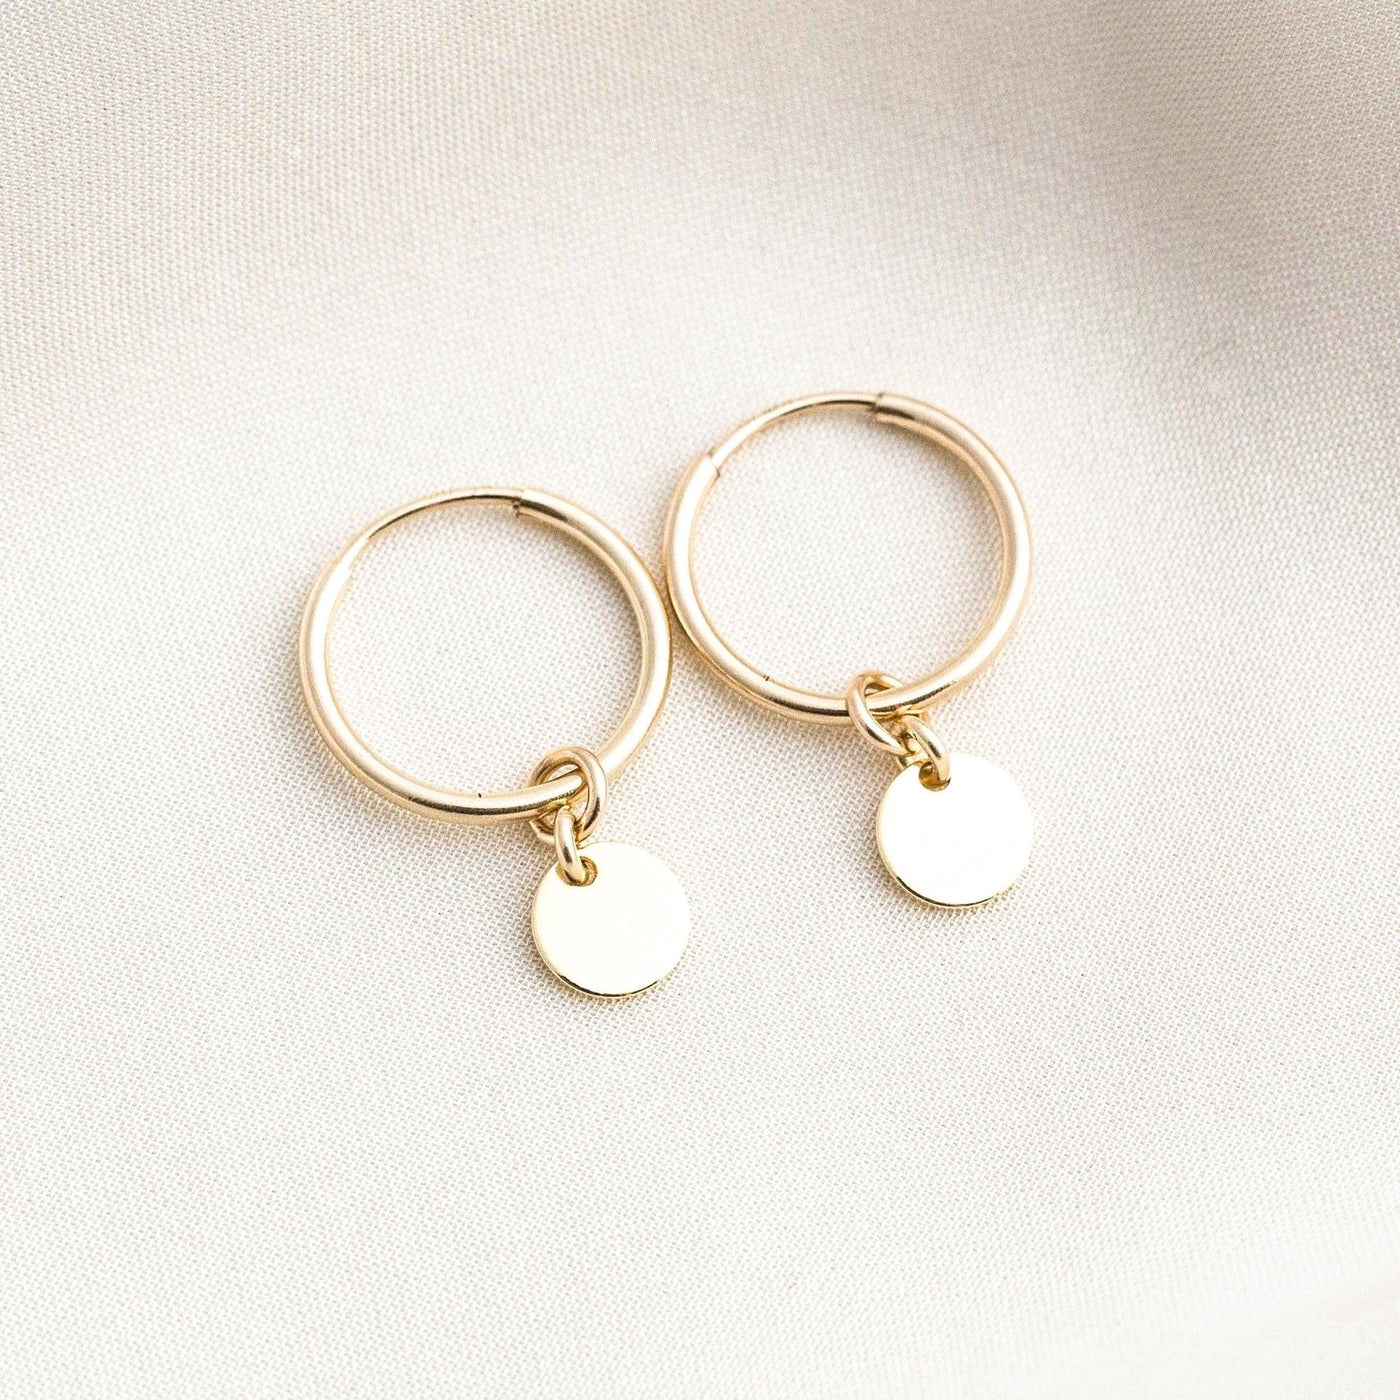 Tiny Coin Hoops by Simple & Dainty Jewelry